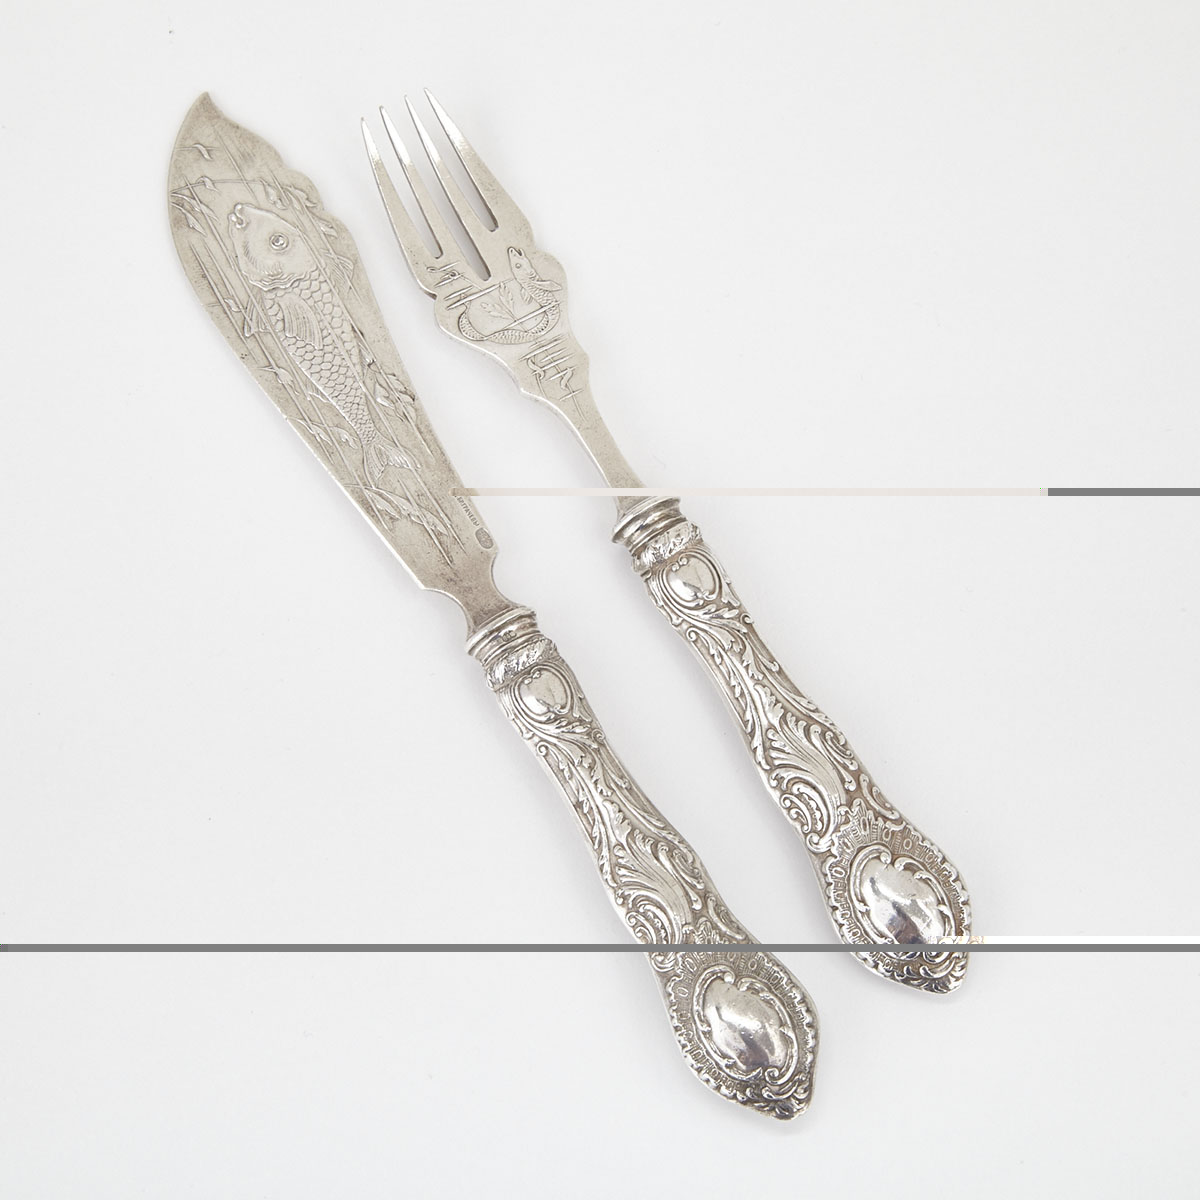 Russian Silver Fish Knife and Fork, Grachev Bros., St. Petersburg, late 19th century